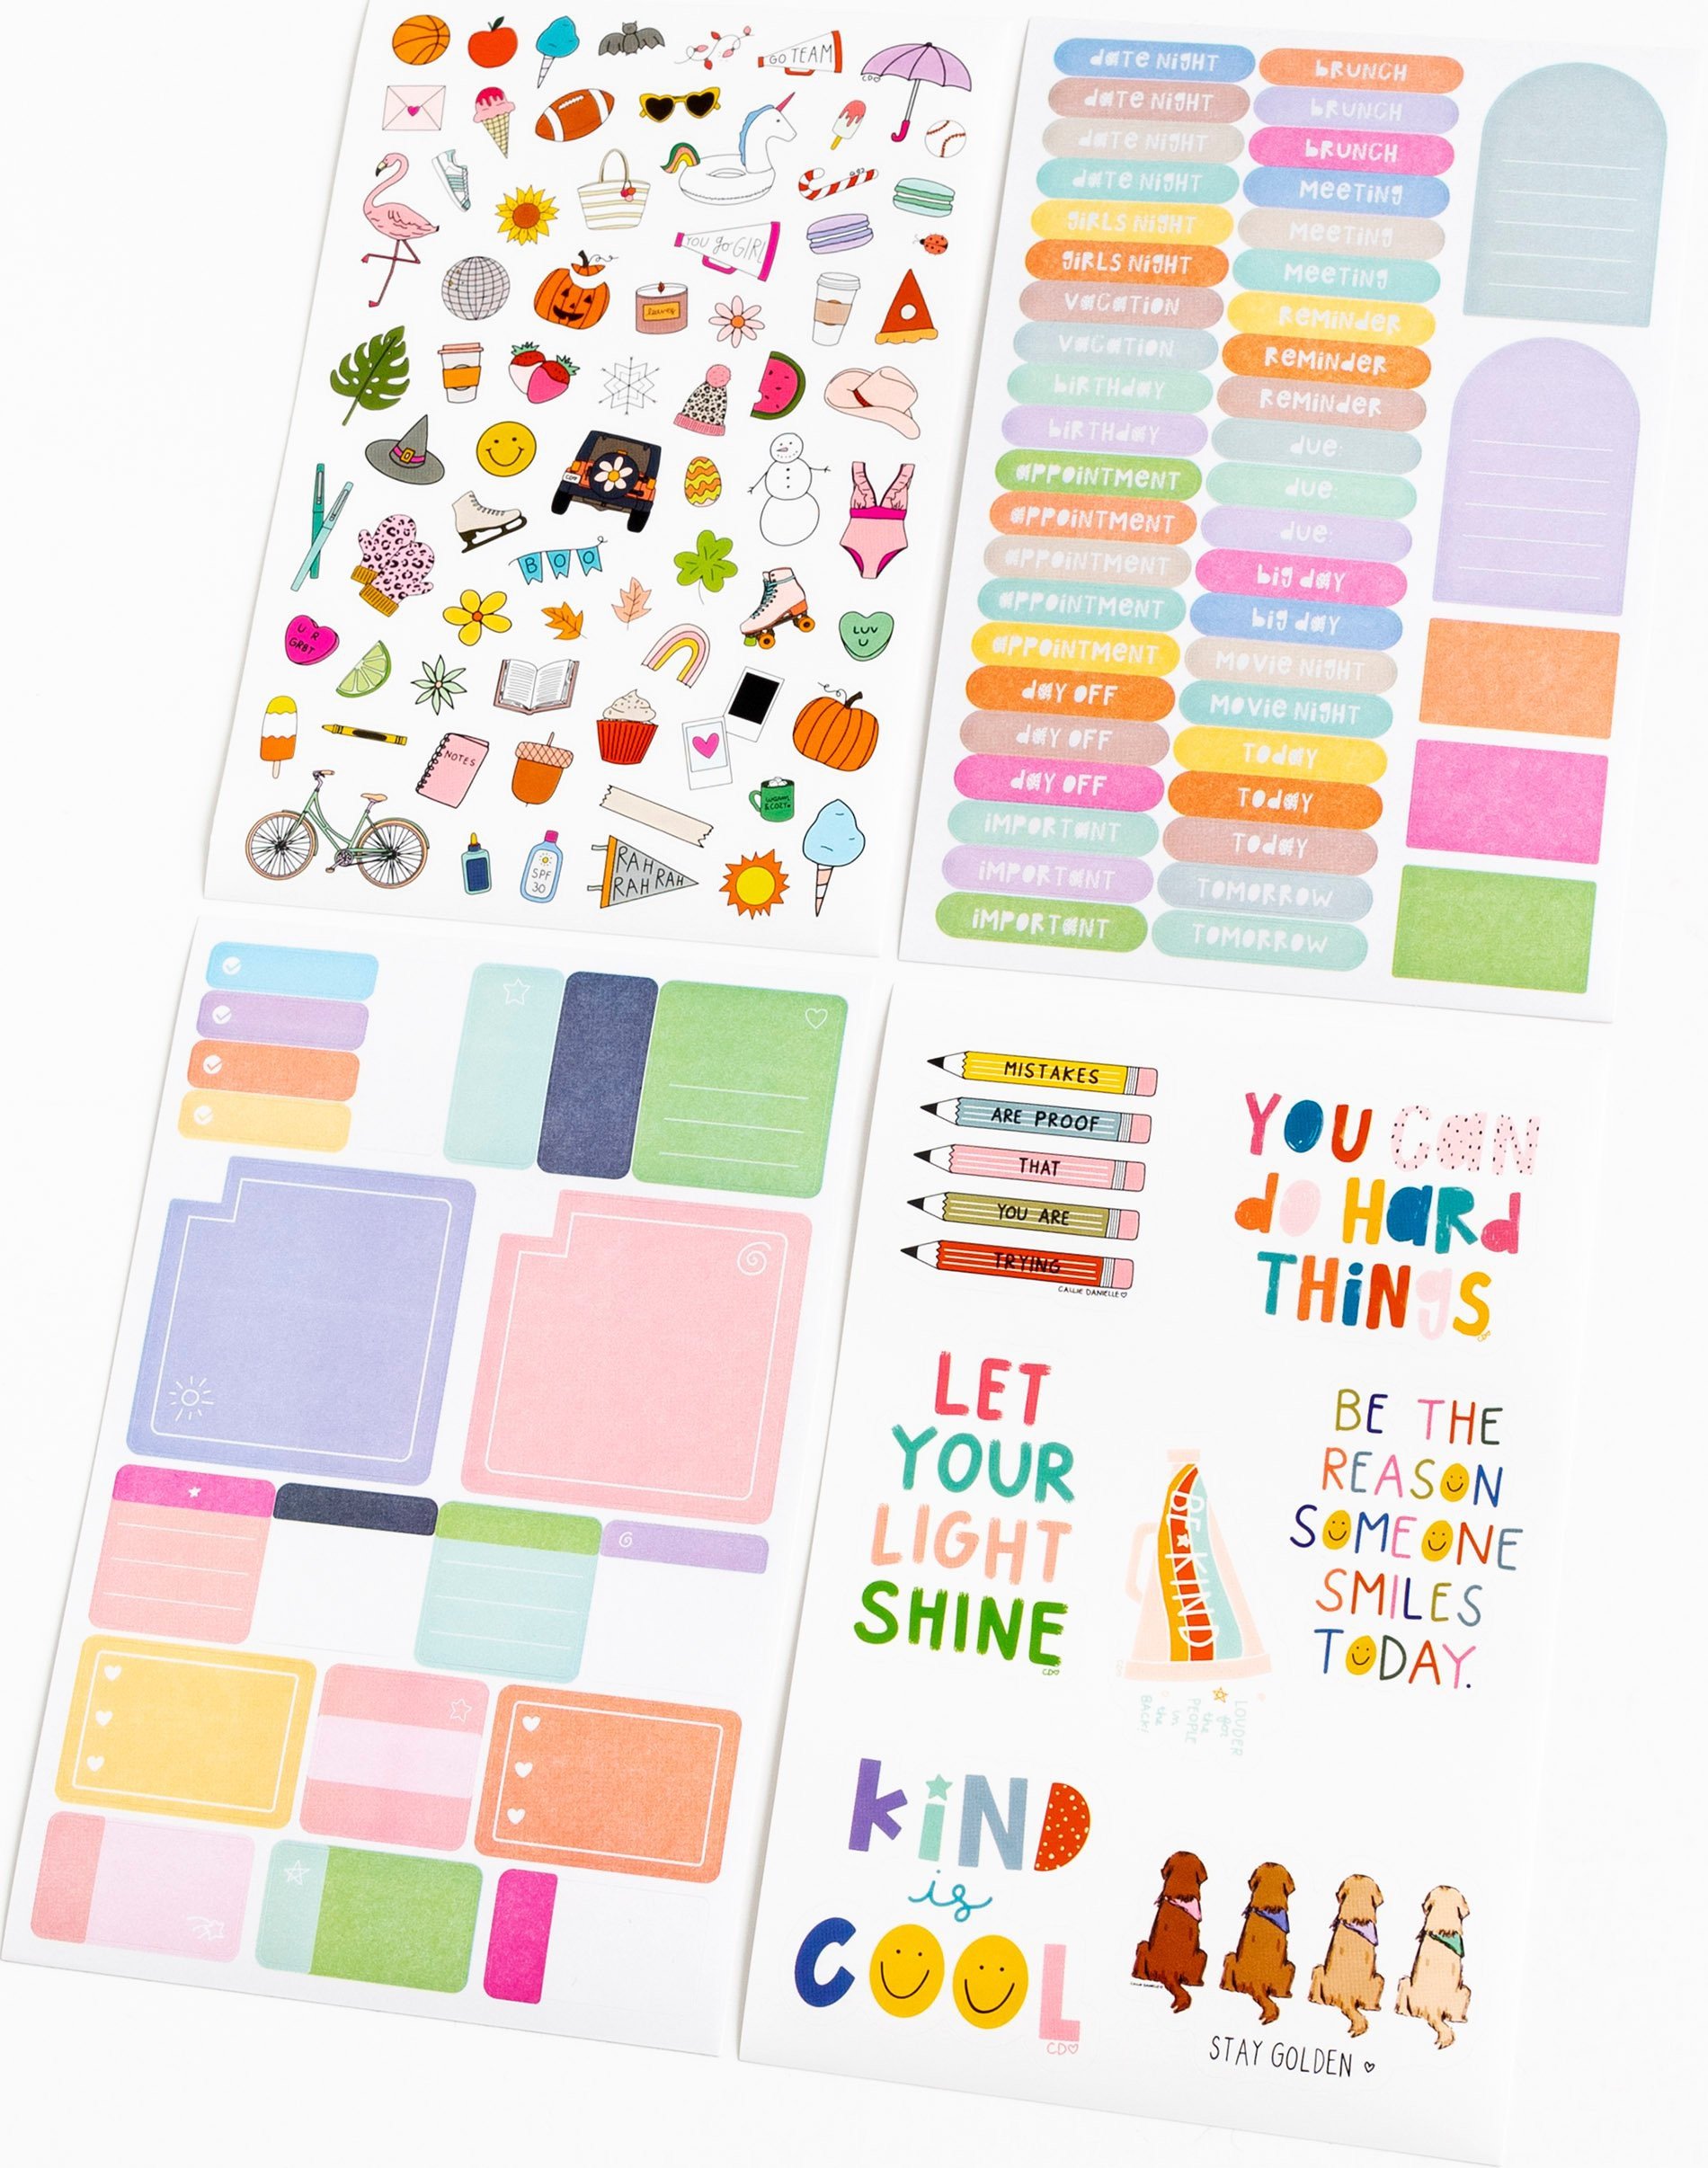 Habit Trackers - Planner Stickers – Trolley Square Market